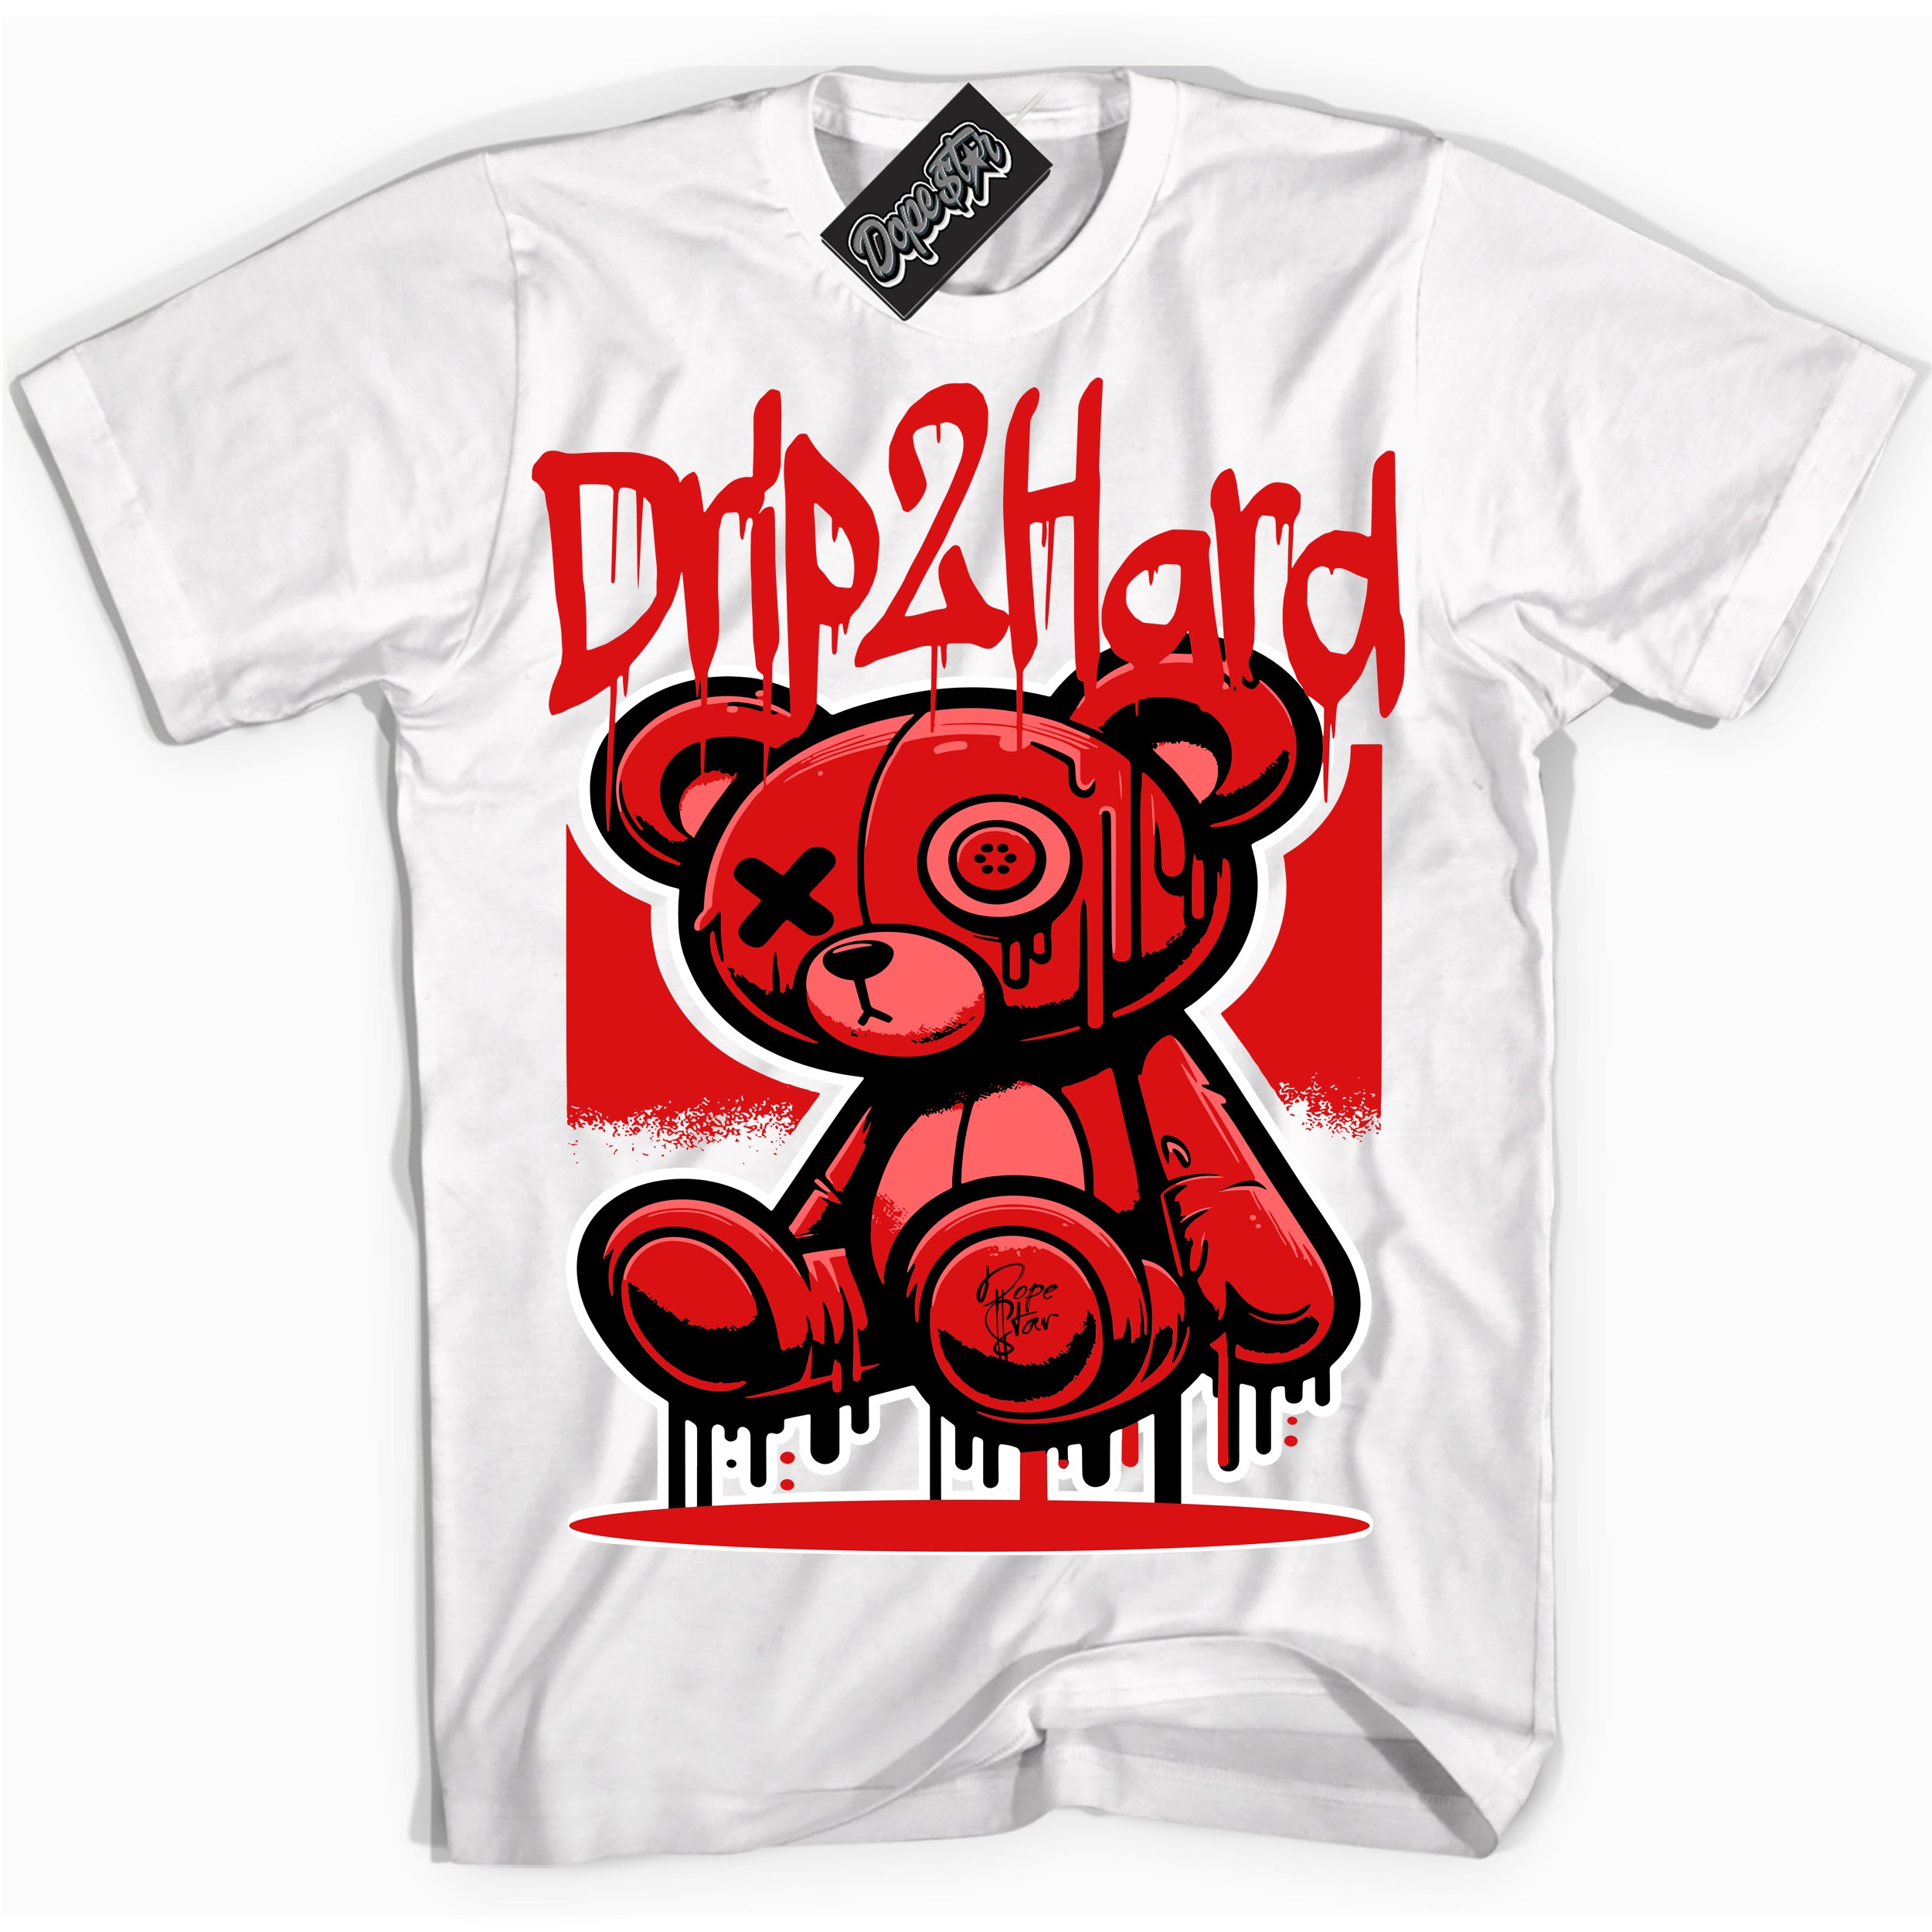 Cool White graphic tee with “ Drip 2 Hard ” design, that perfectly matches Chile Red 9s